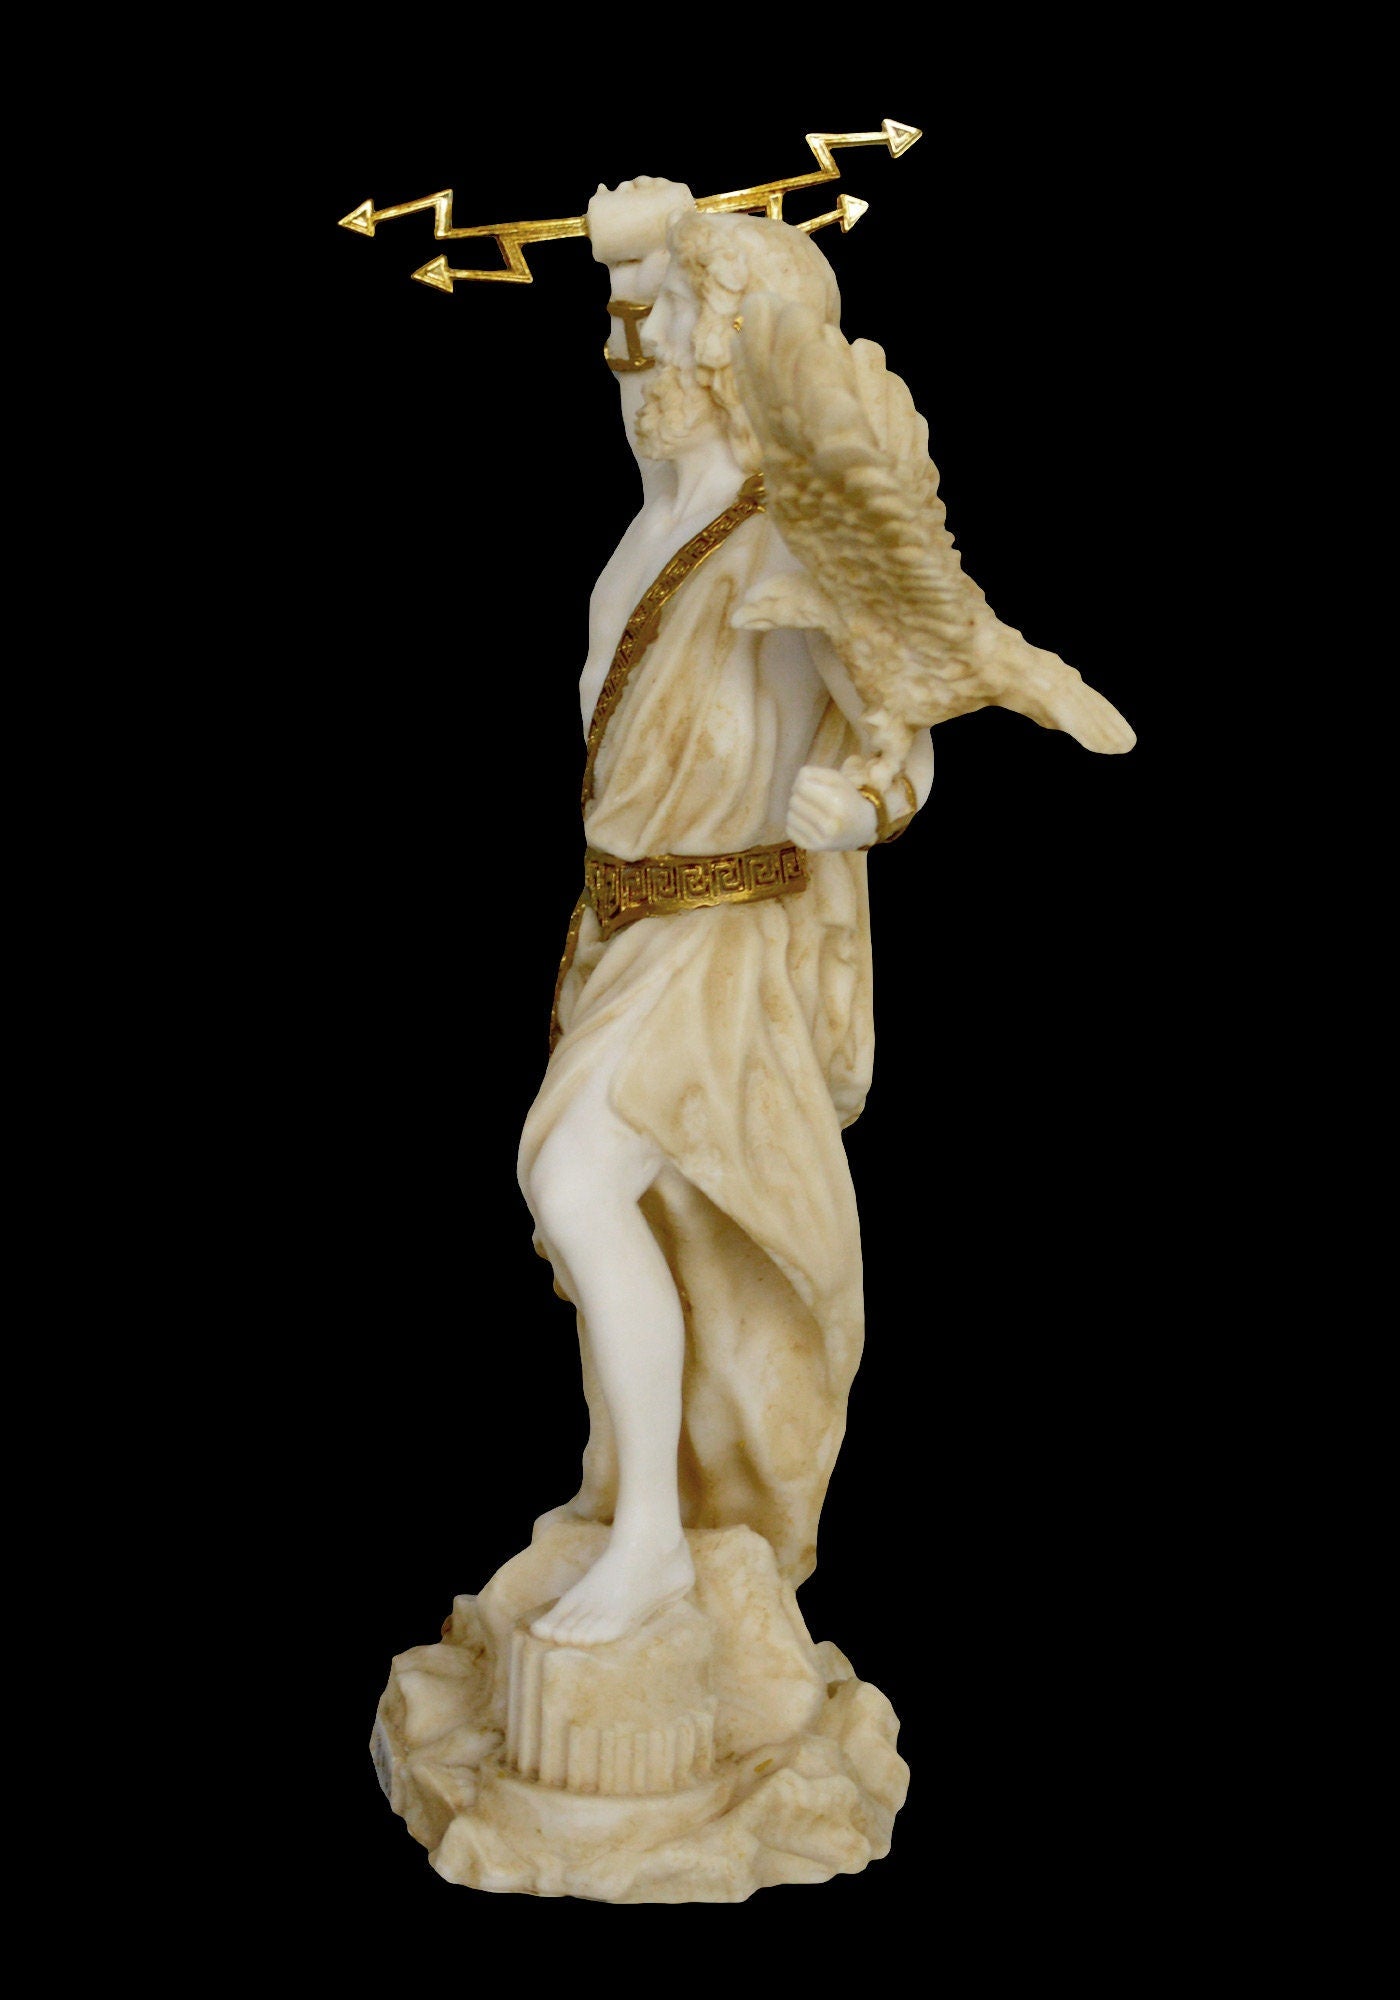 Zeus Jupiter - Greek Roman God of the Sky, Law and Order, Destiny and Fate - King of the Gods of Mount Olympus - Alabaster Aged Statue